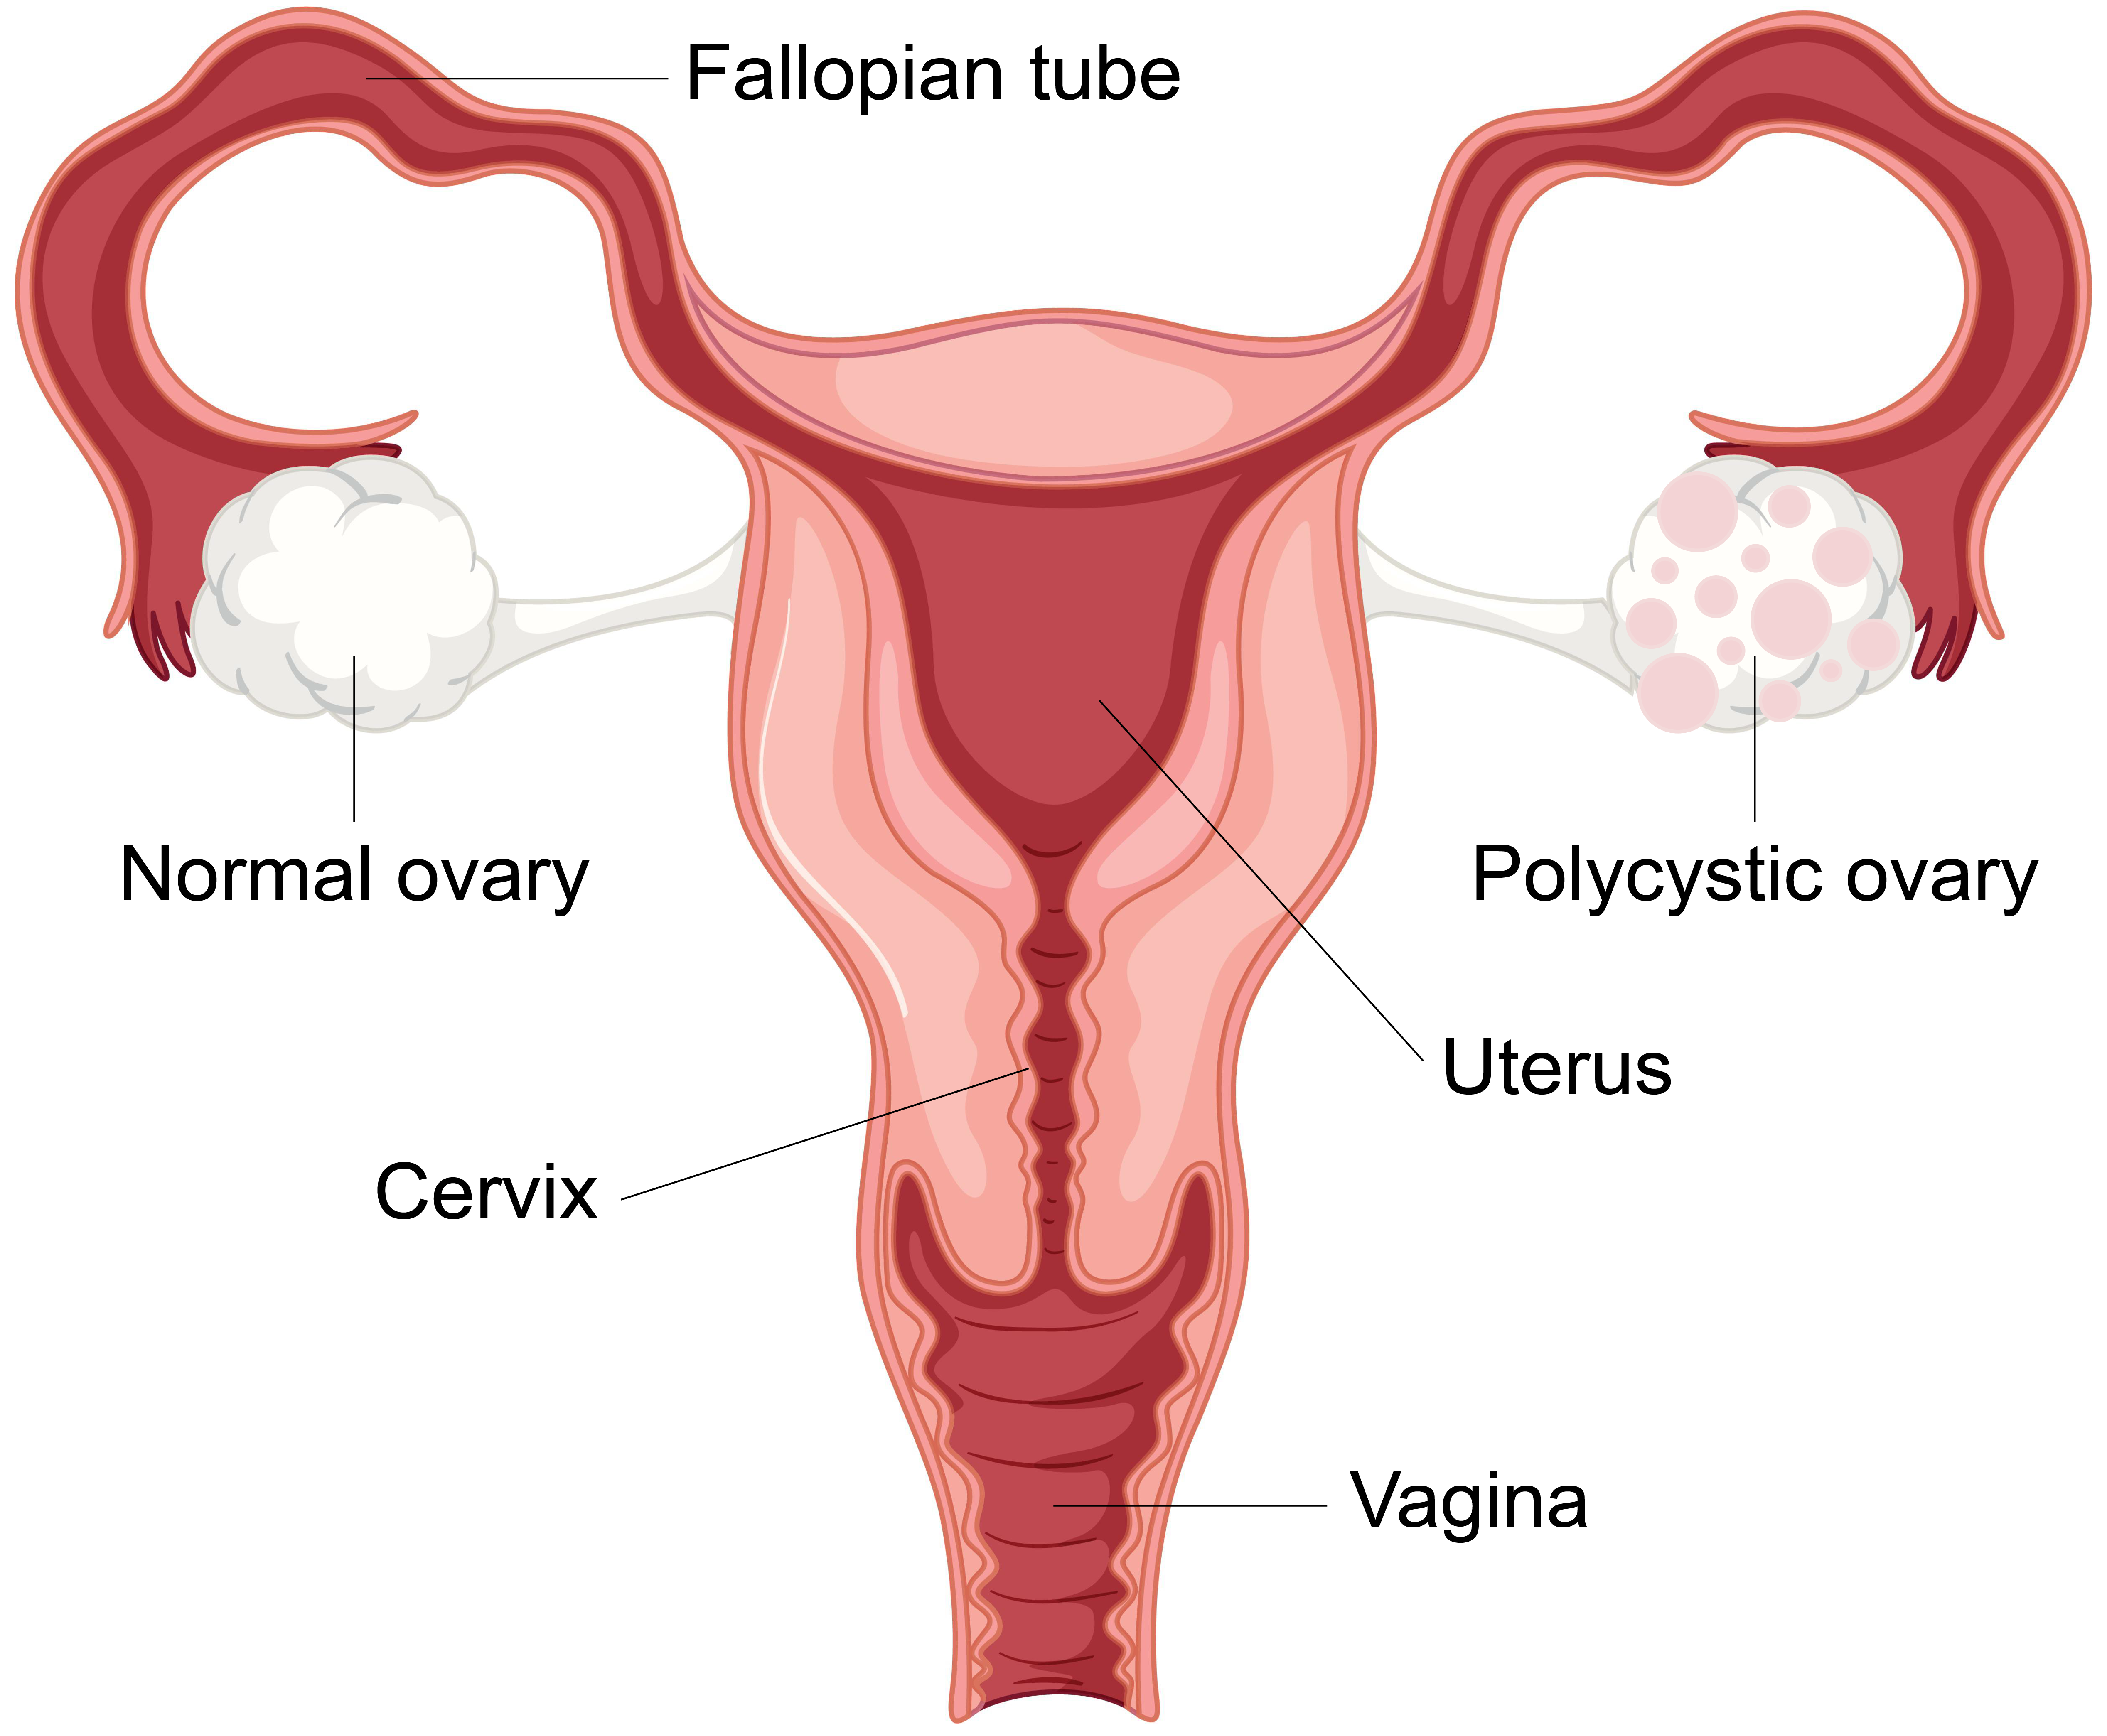 Illustration showing a normal ovary and a polycystic ovary.